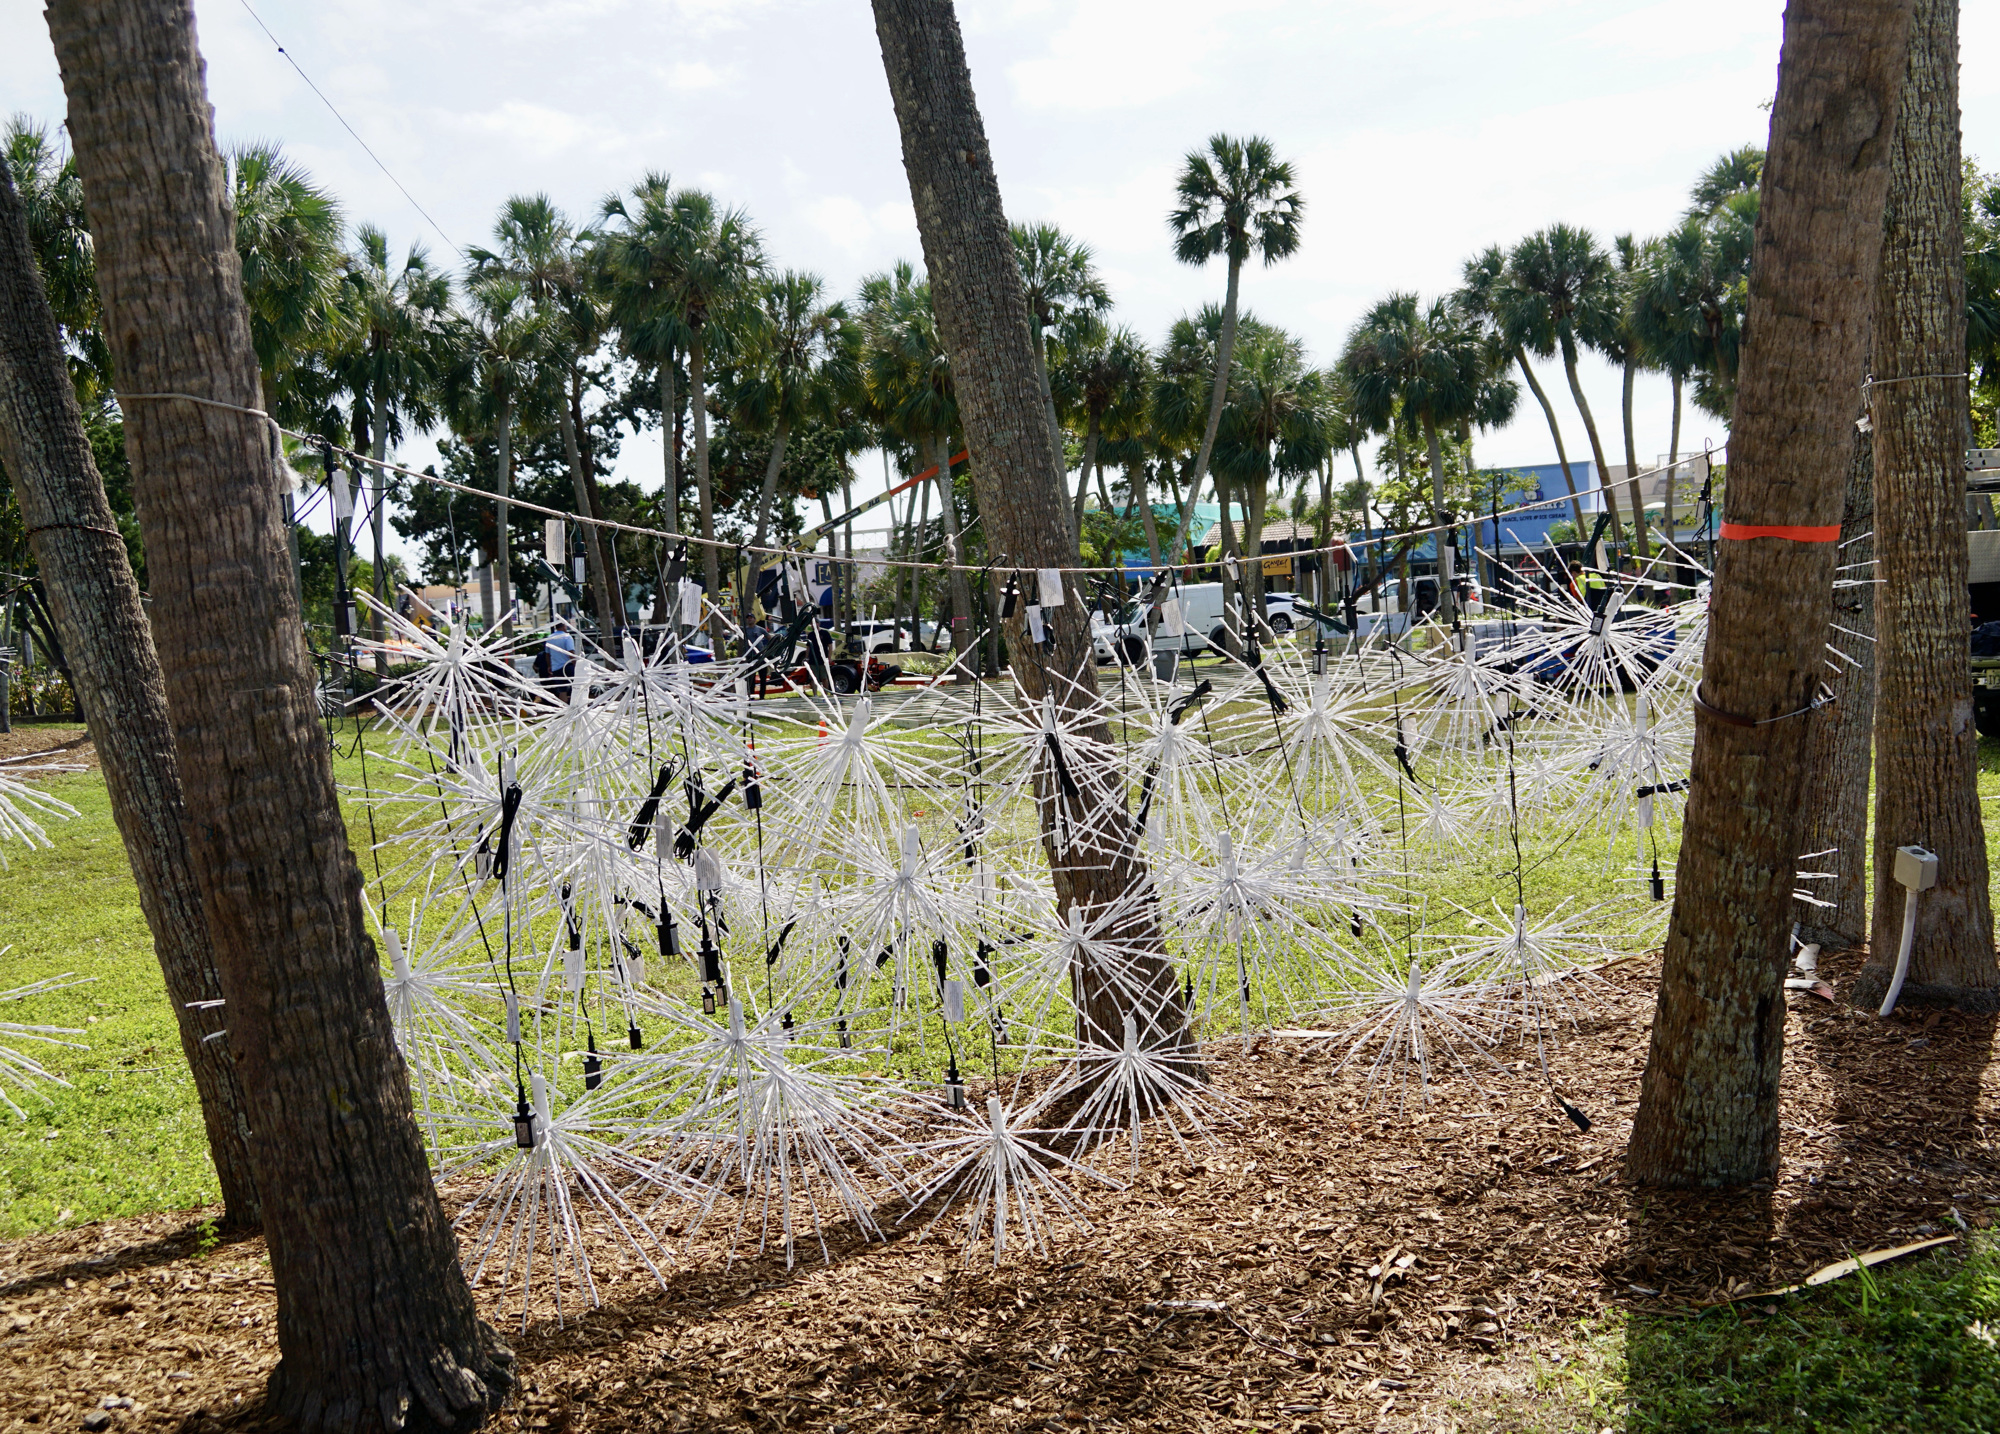 Decorating was underway this week in St. Armands Circle. (Eric Garwood)